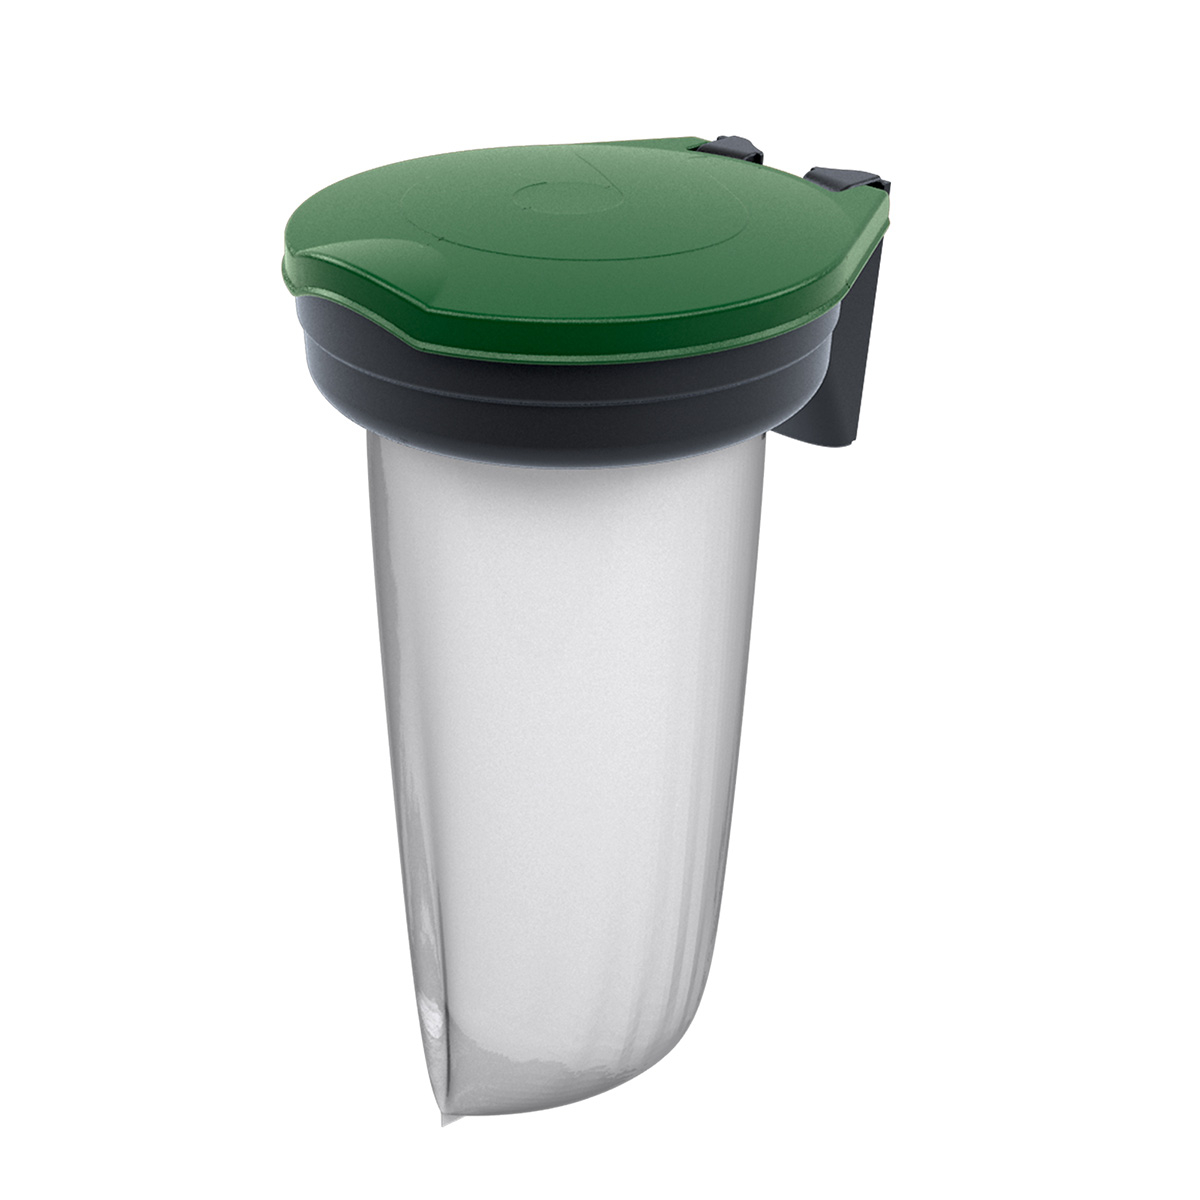 Skipper™ Barrier Recycling Bin Green Lid - Ideal For Waste Management At Events